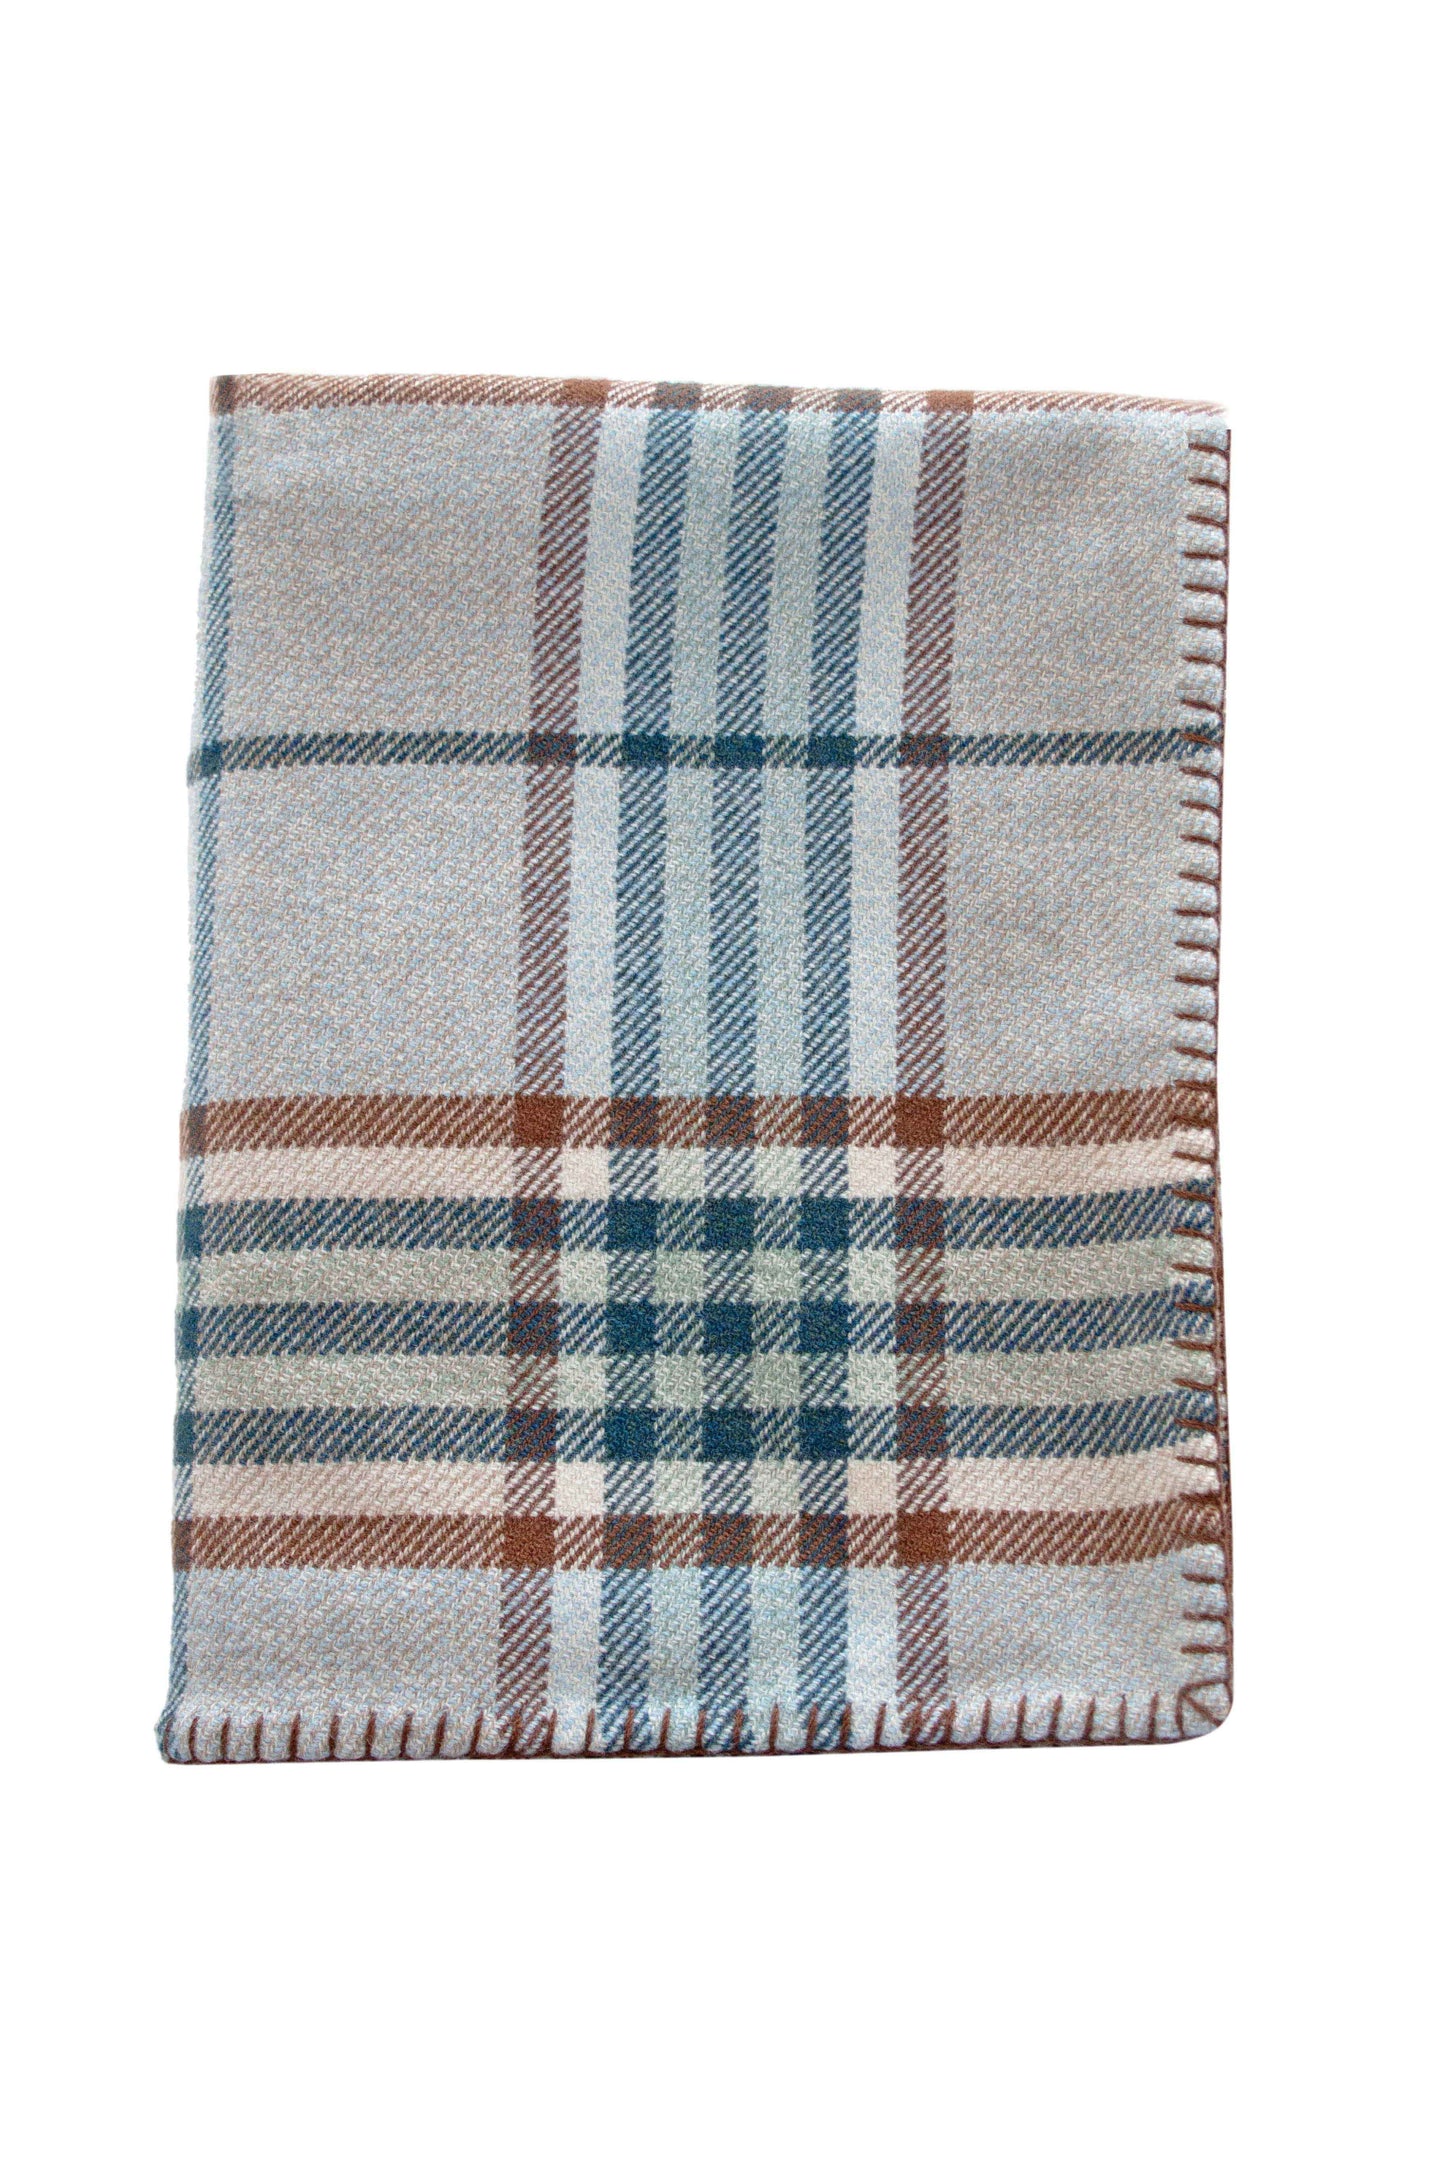 The Crofter's Blanket | Limited Edition